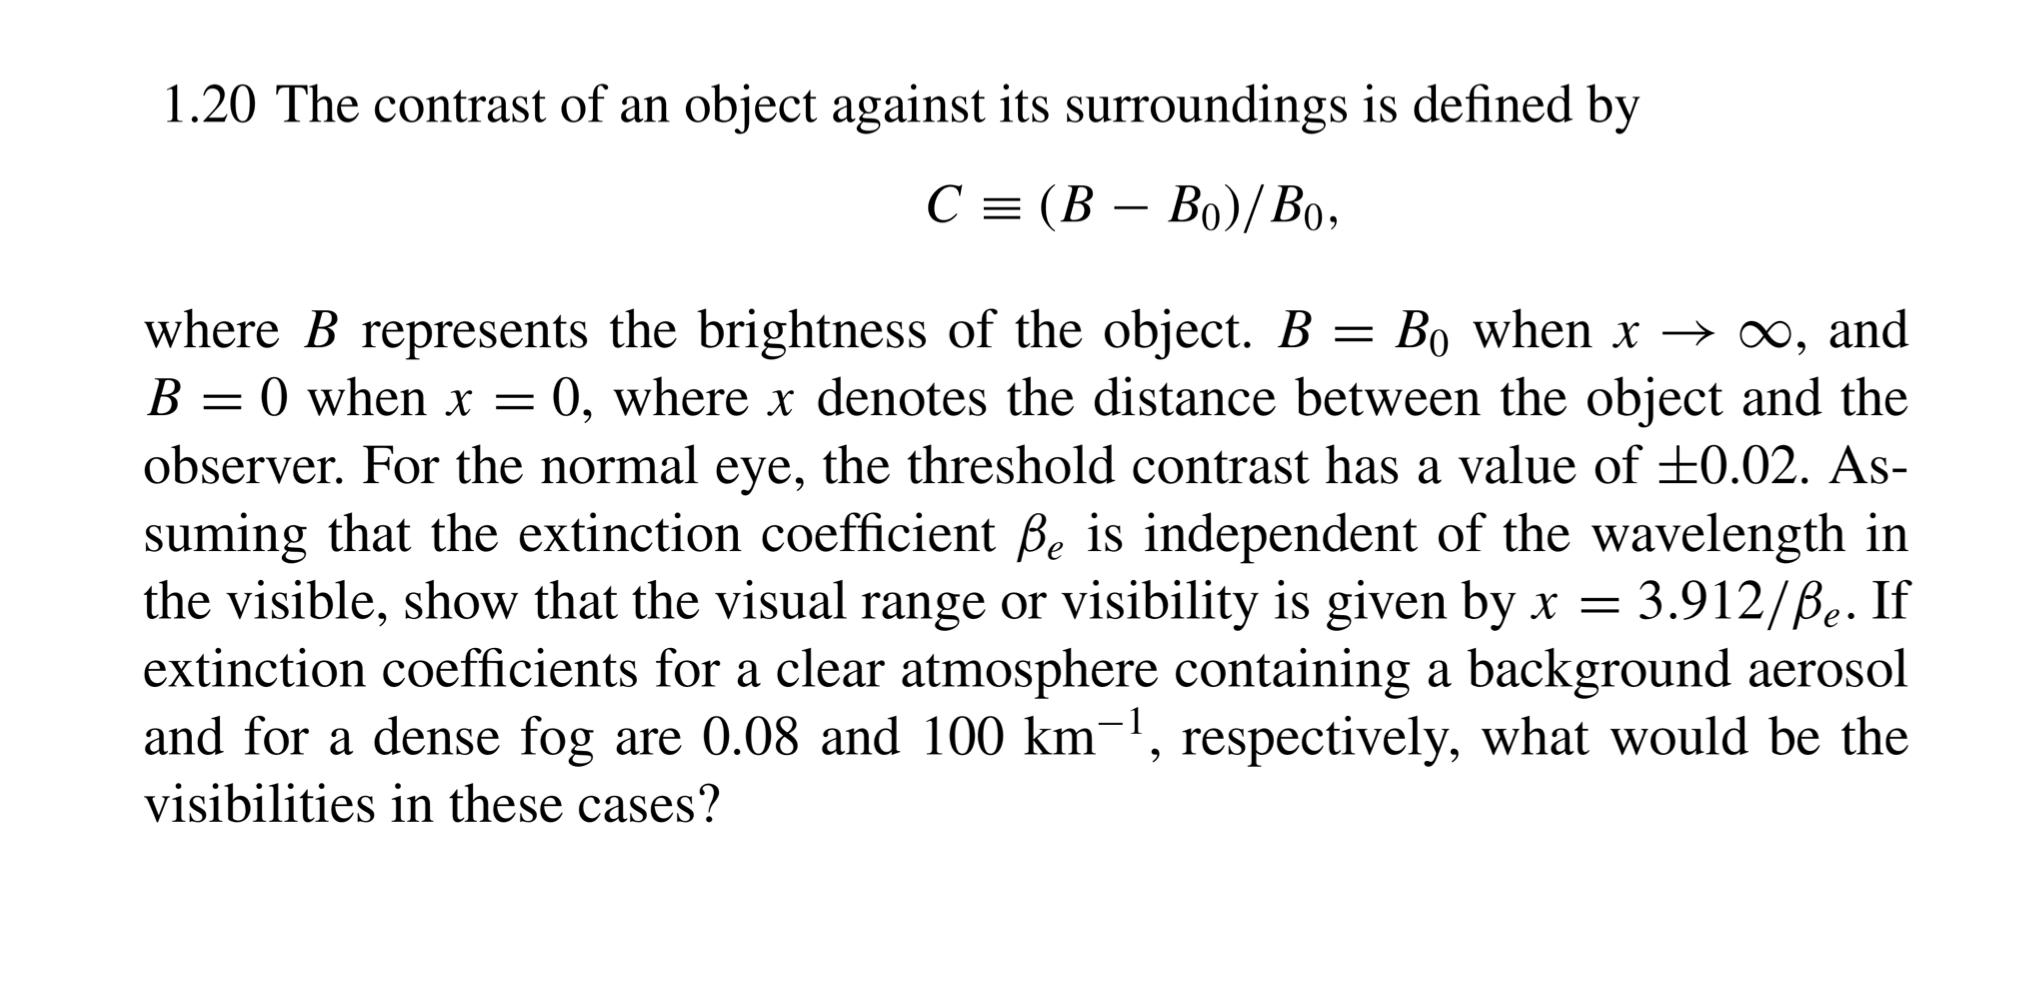 1.20 The contrast of an object against its surroundings is defined by C = (B-Bo)/Bo, where B represents the